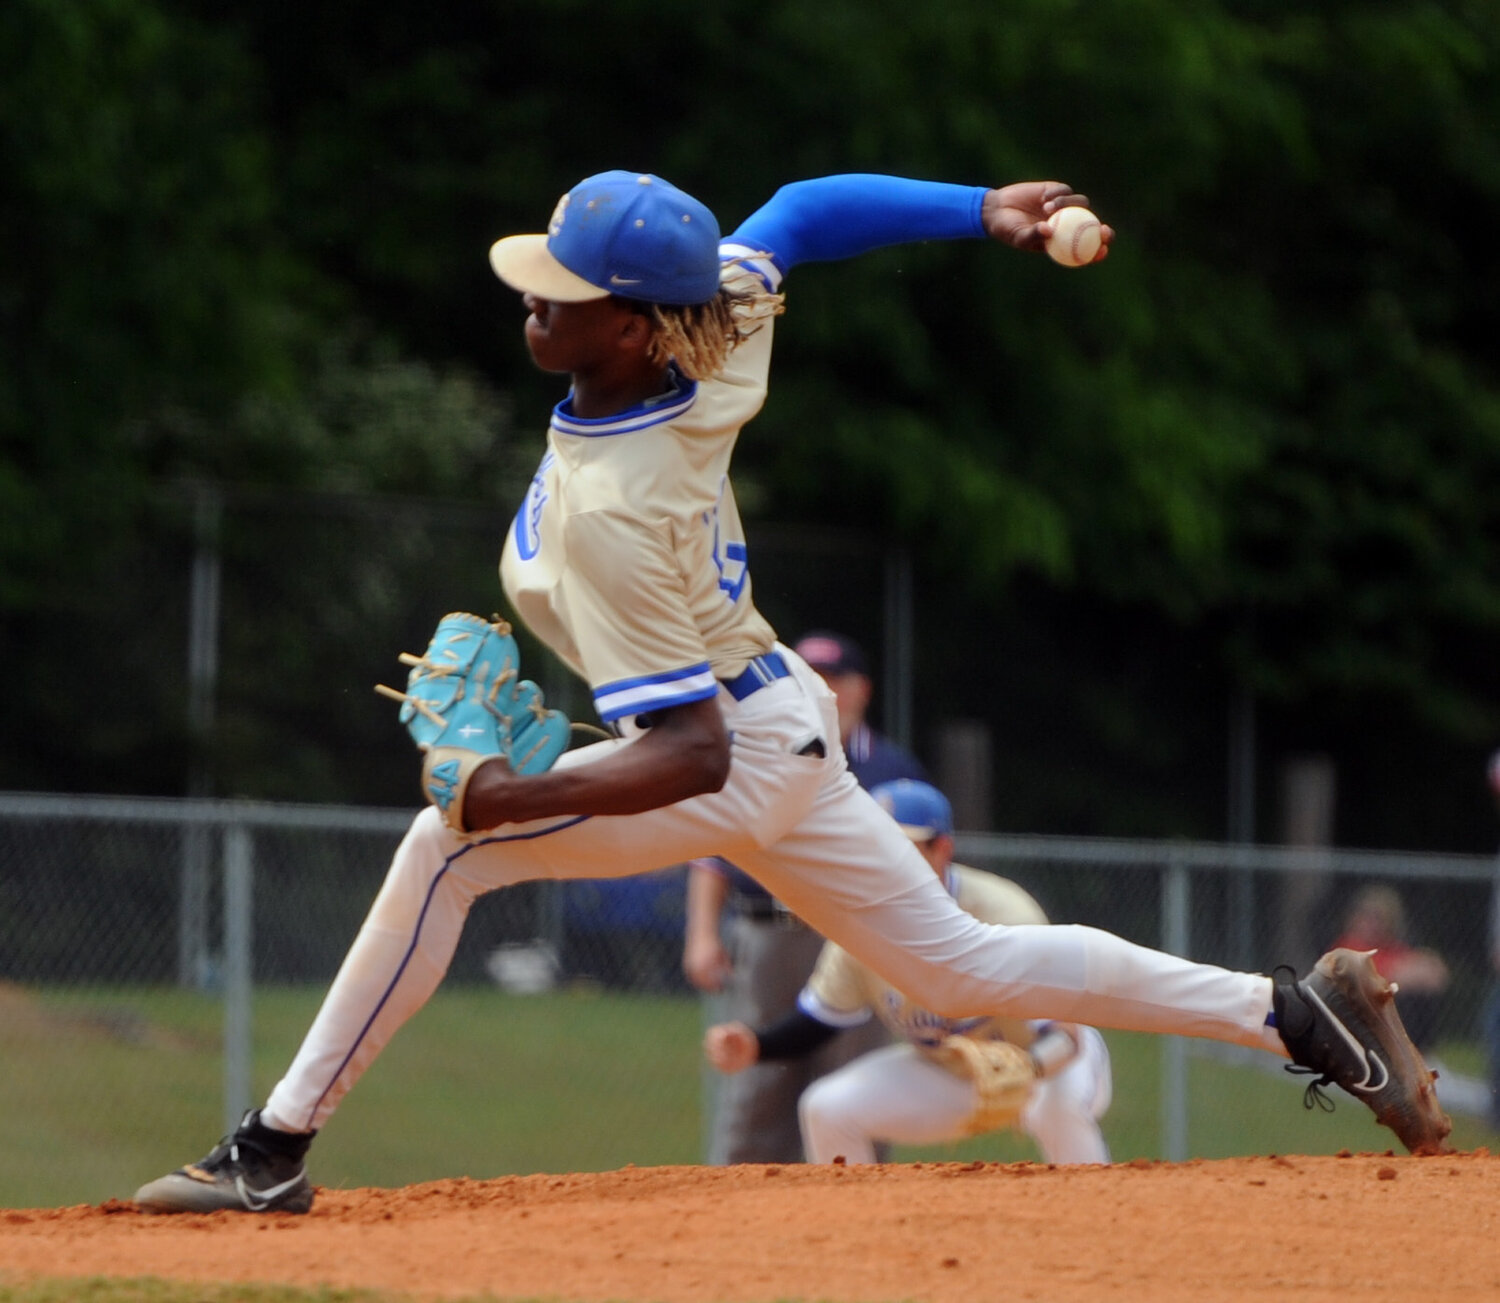 Marquis Wilson delivers a pitch against Coffee County on Saturday afternoon. Wilson went 4 1/3 innings and gave up four runs on two hits, only one of which was earned.